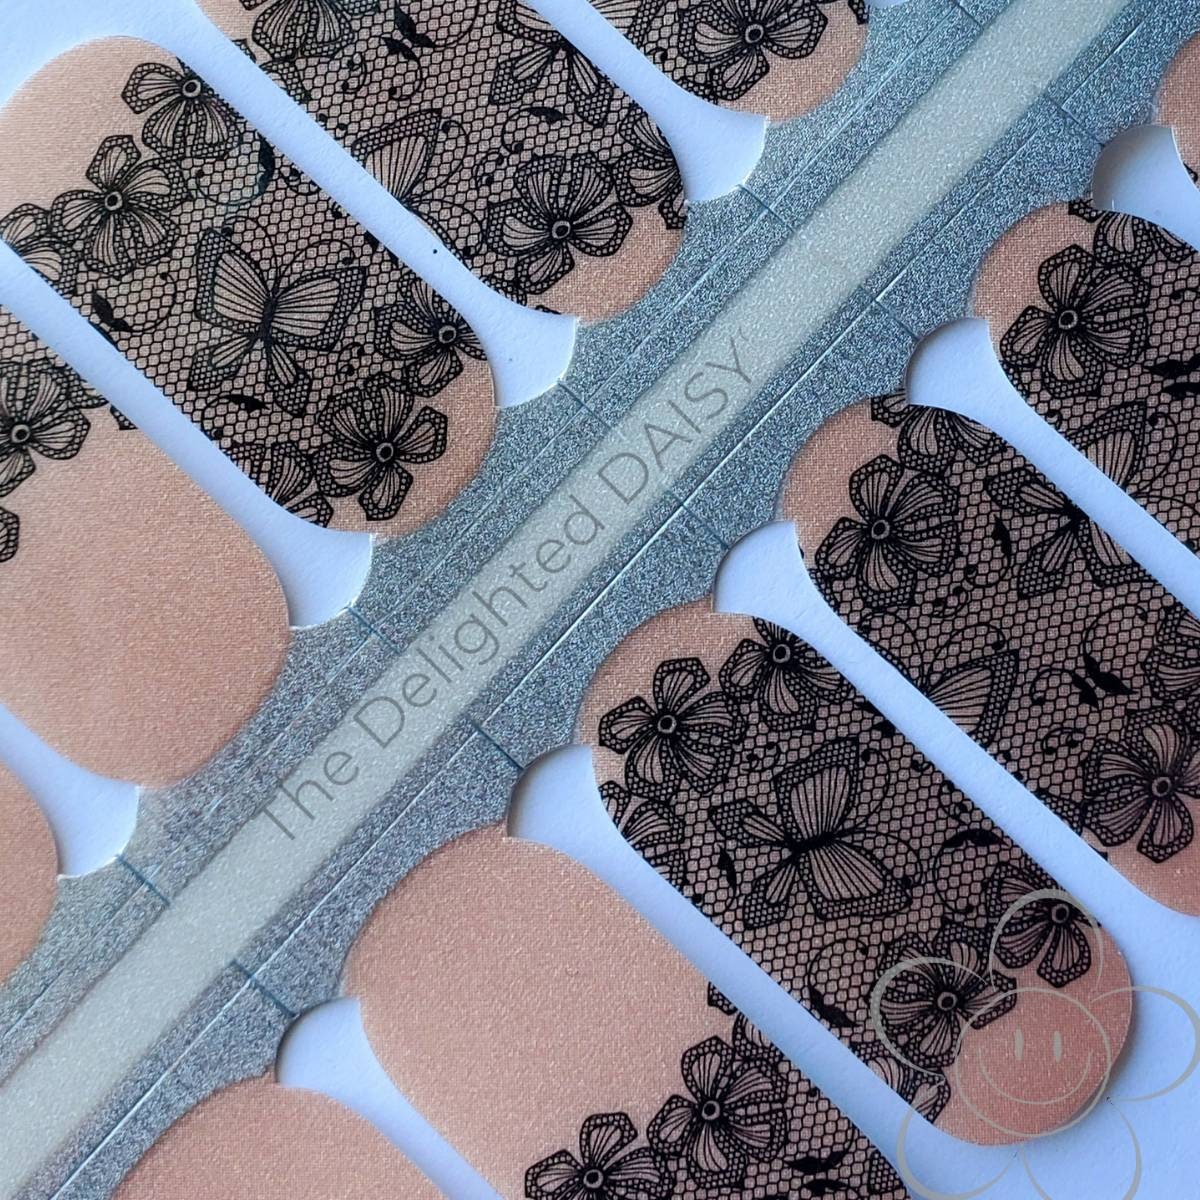 Black Butterfly Lace Nail Wraps, Strips, Sticker, Art von Etsy - TheDelightedDaisy